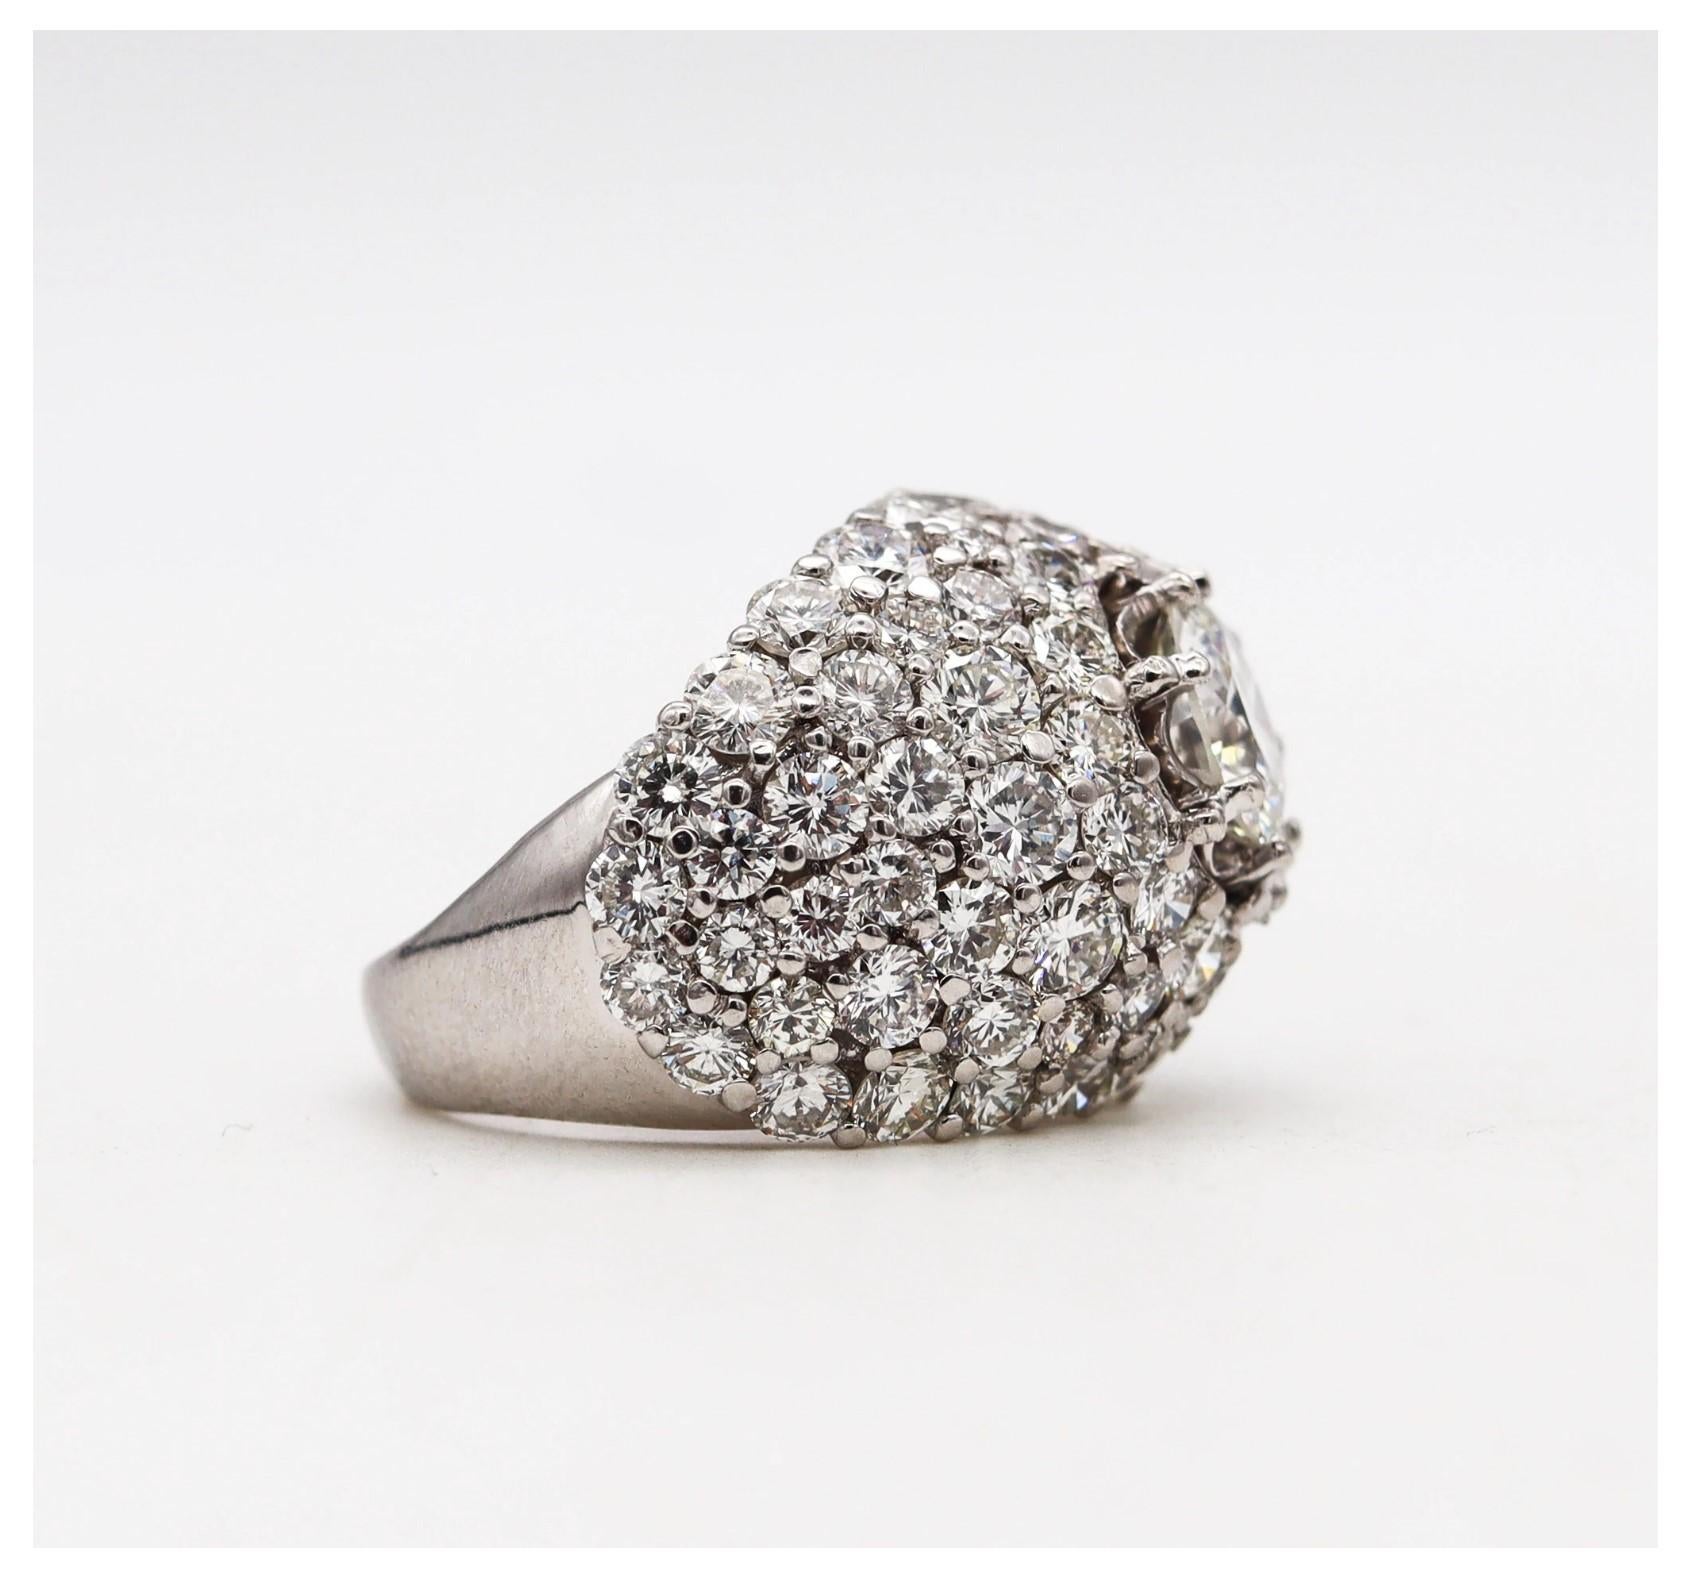 Brilliant Cut Yanes Exceptional Platinum Cluster Cocktail Ring Gia Certified 10.16 Ctw Diamond For Sale